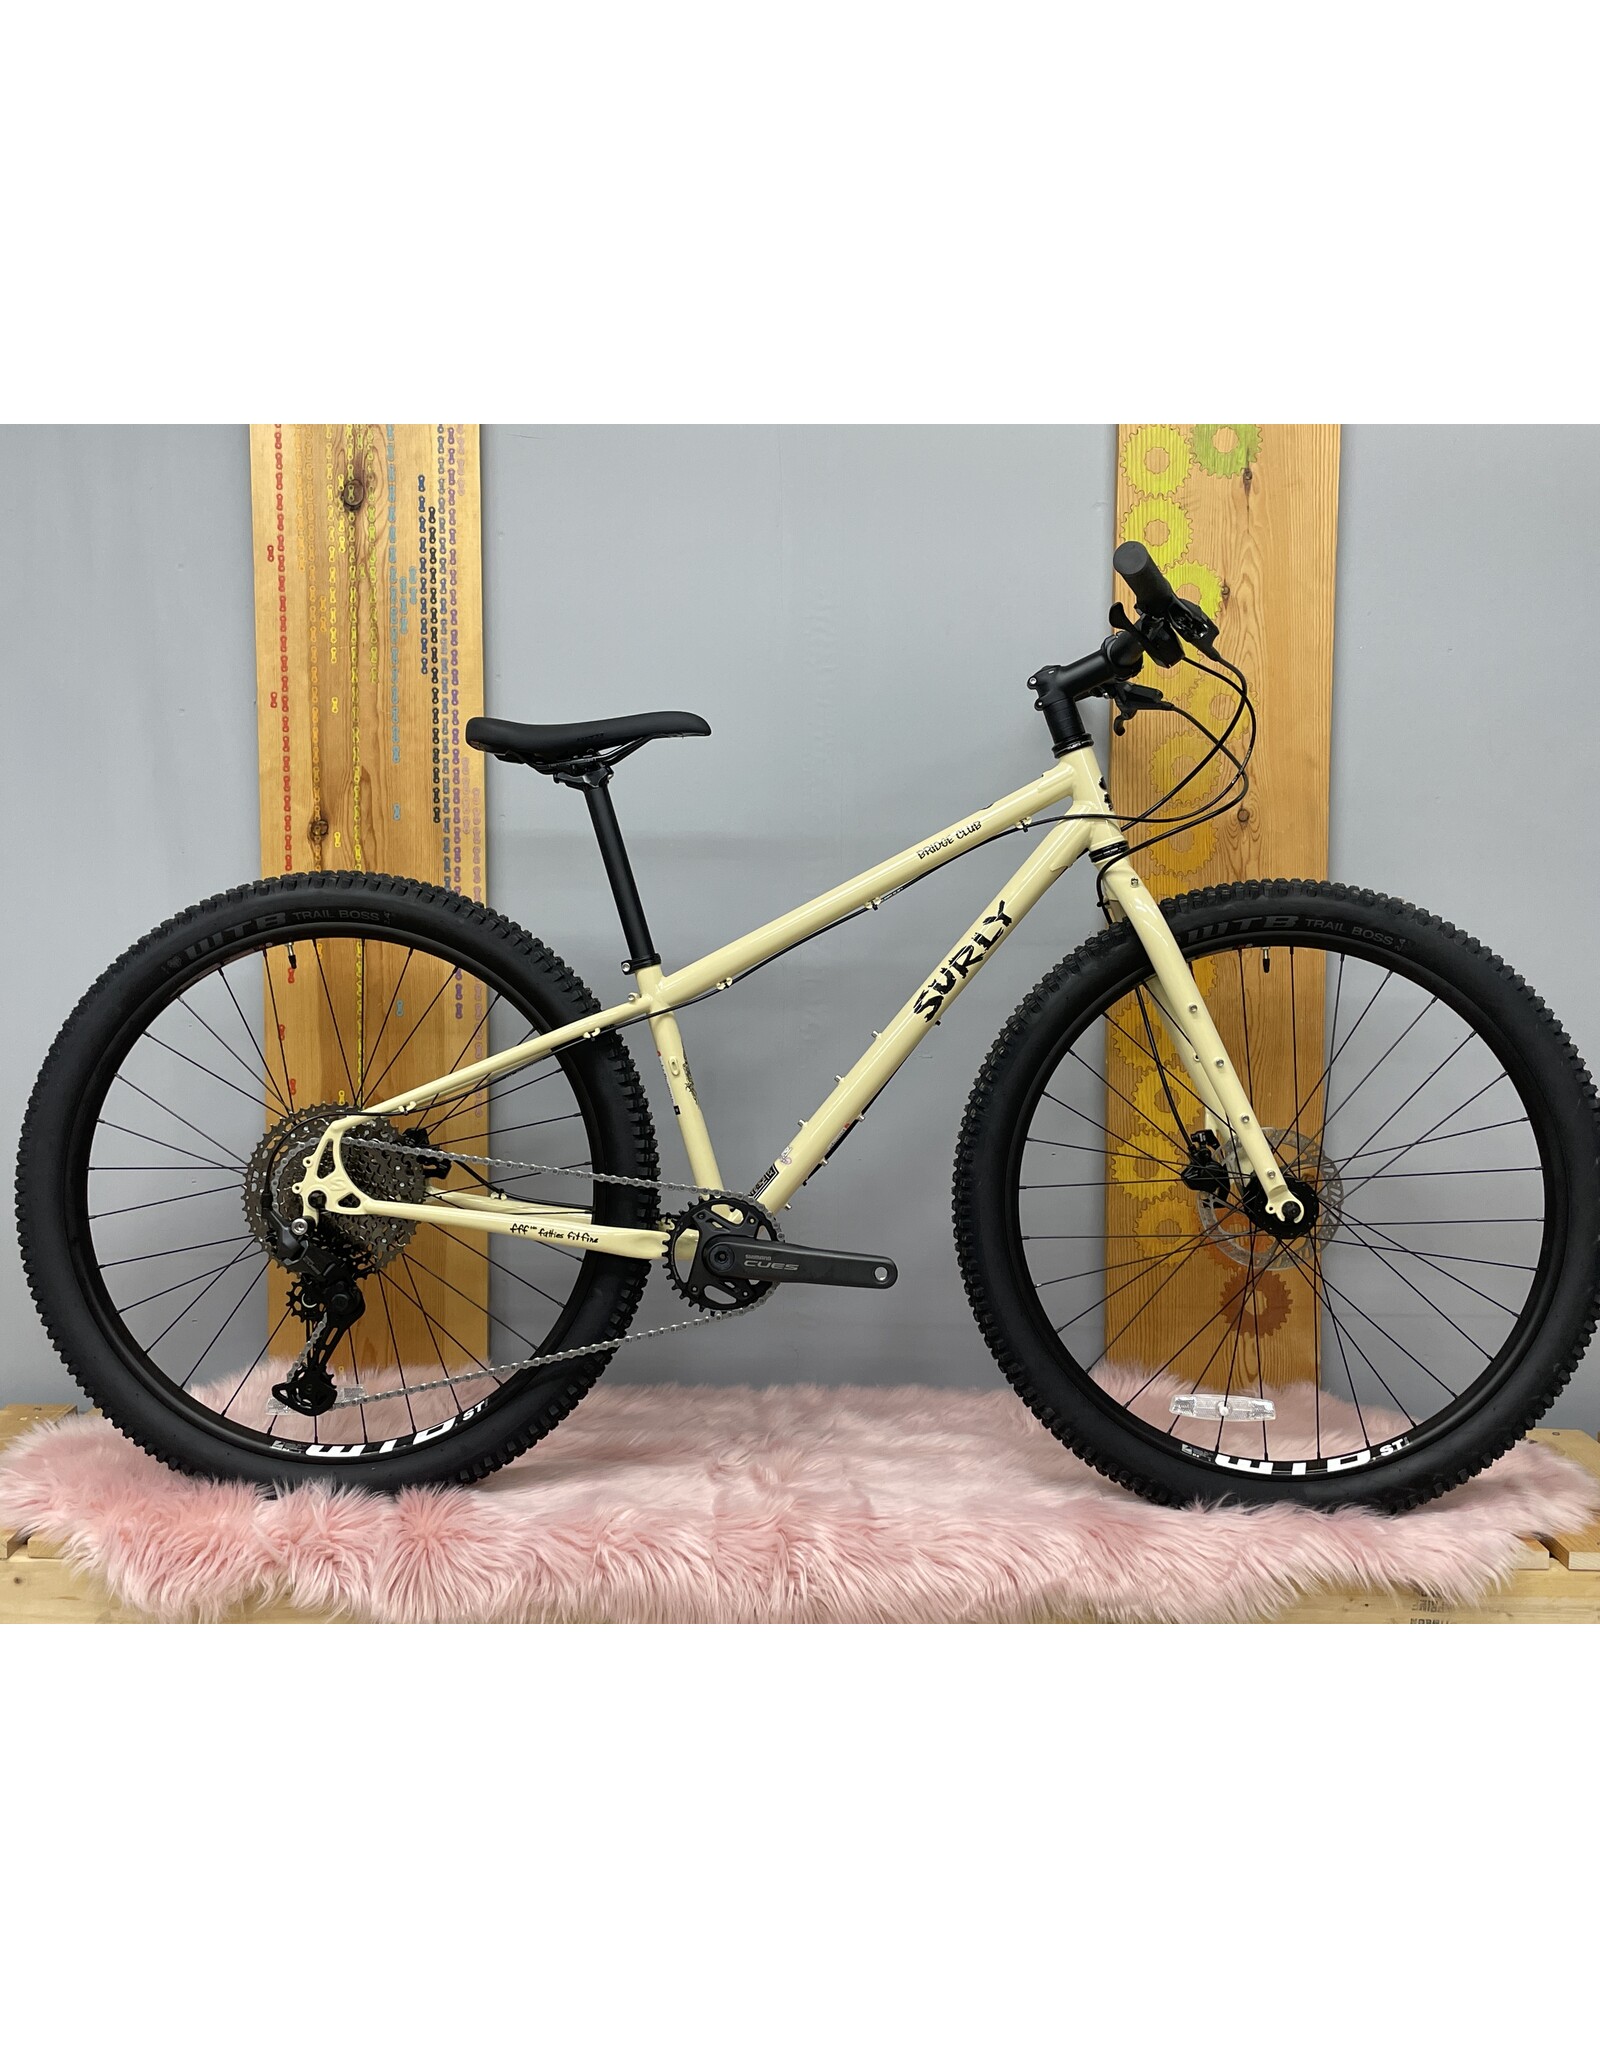 Surly Surly Bridge Club Bike - 27.5", Steel, Whipped Butter, X-Small